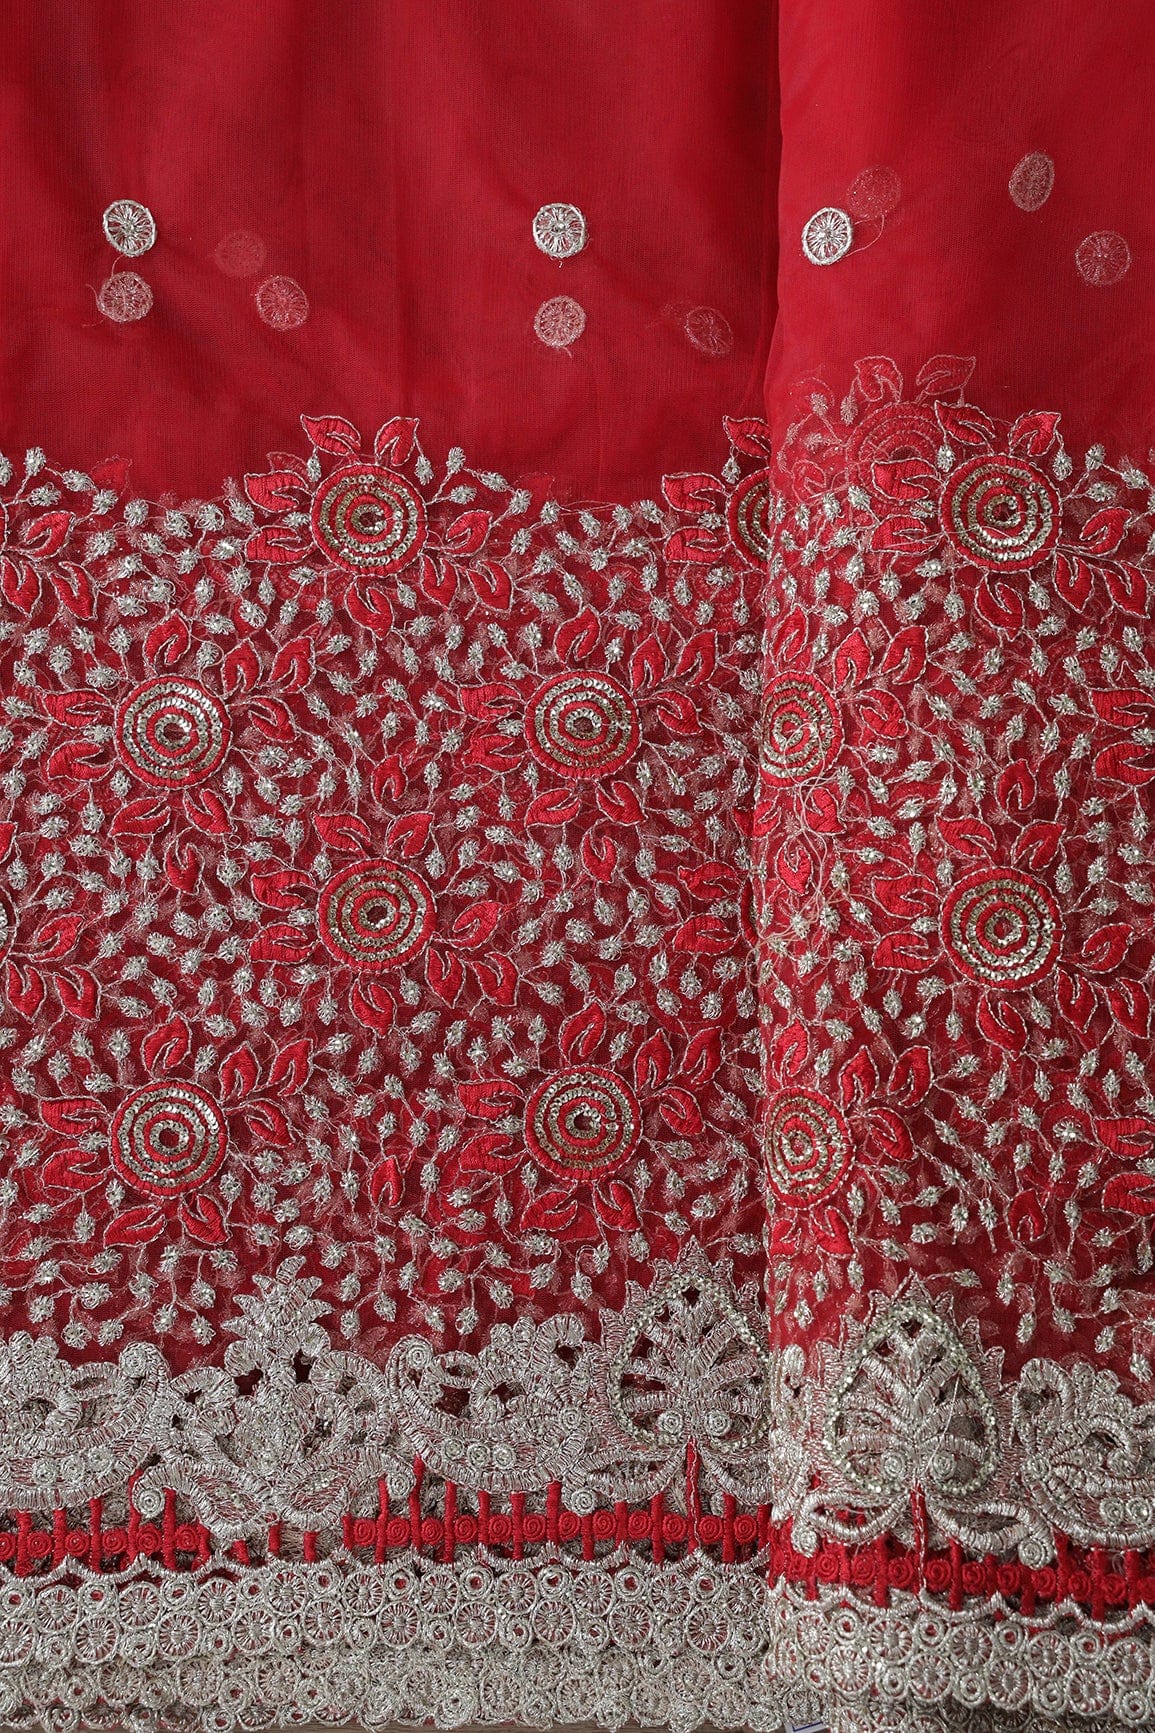 doeraa Embroidery Fabrics Big Width''56'' Red Thread With Zari Floral Embroidery Work On Red Soft Net Fabric With Border